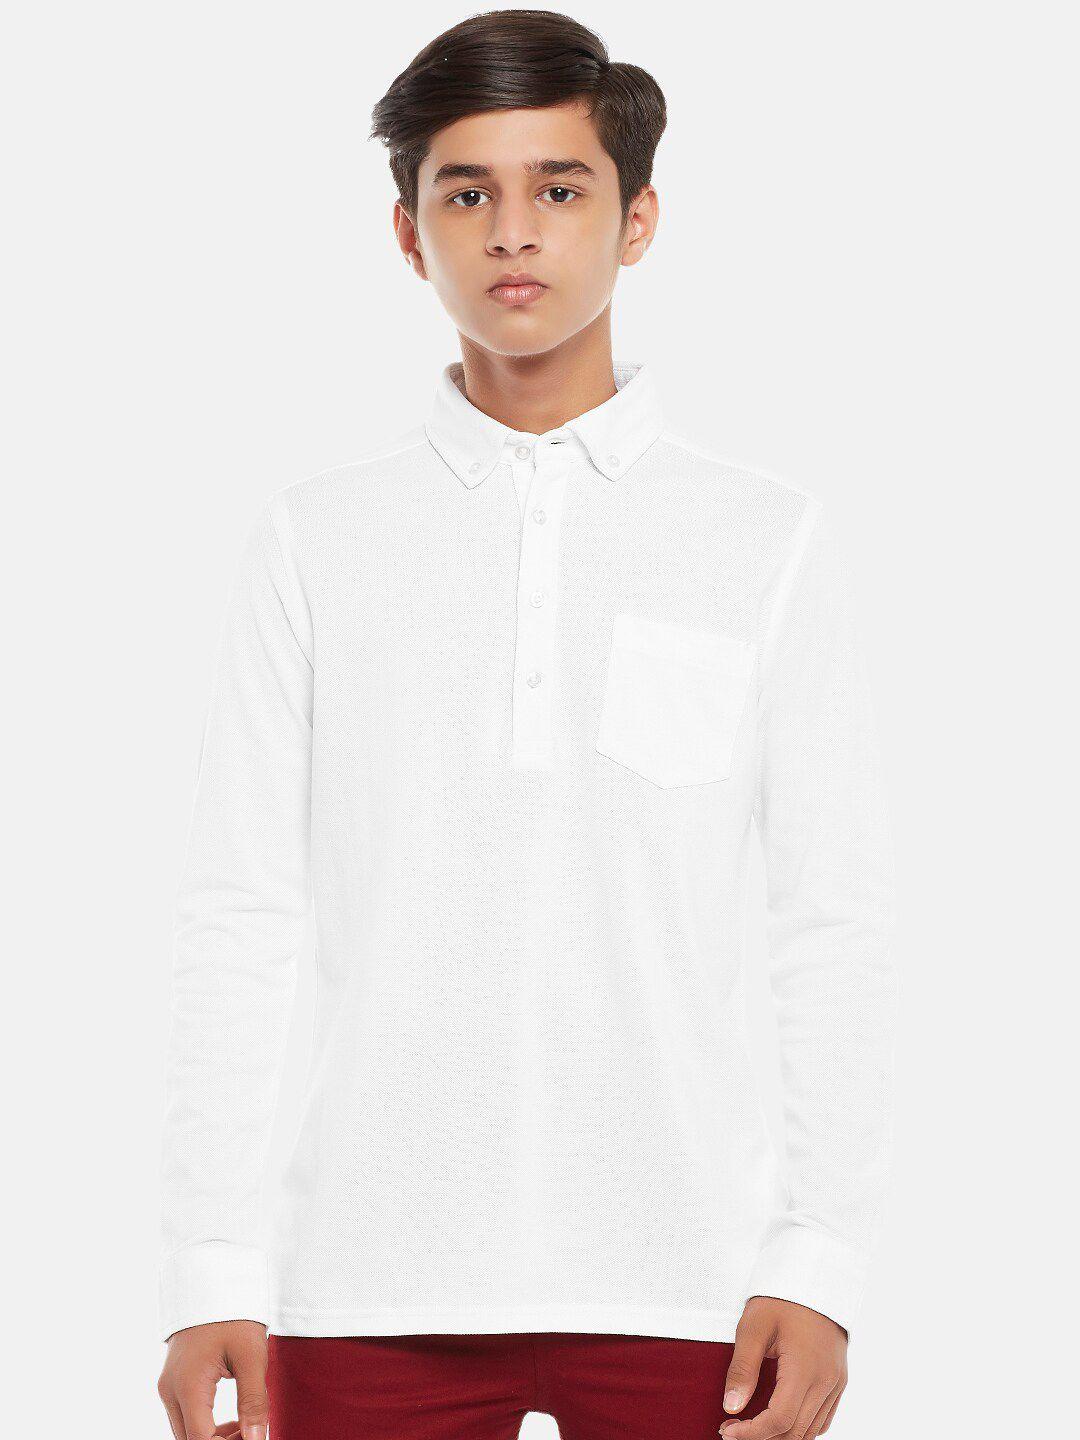 coolsters by pantaloons boys white casual shirt